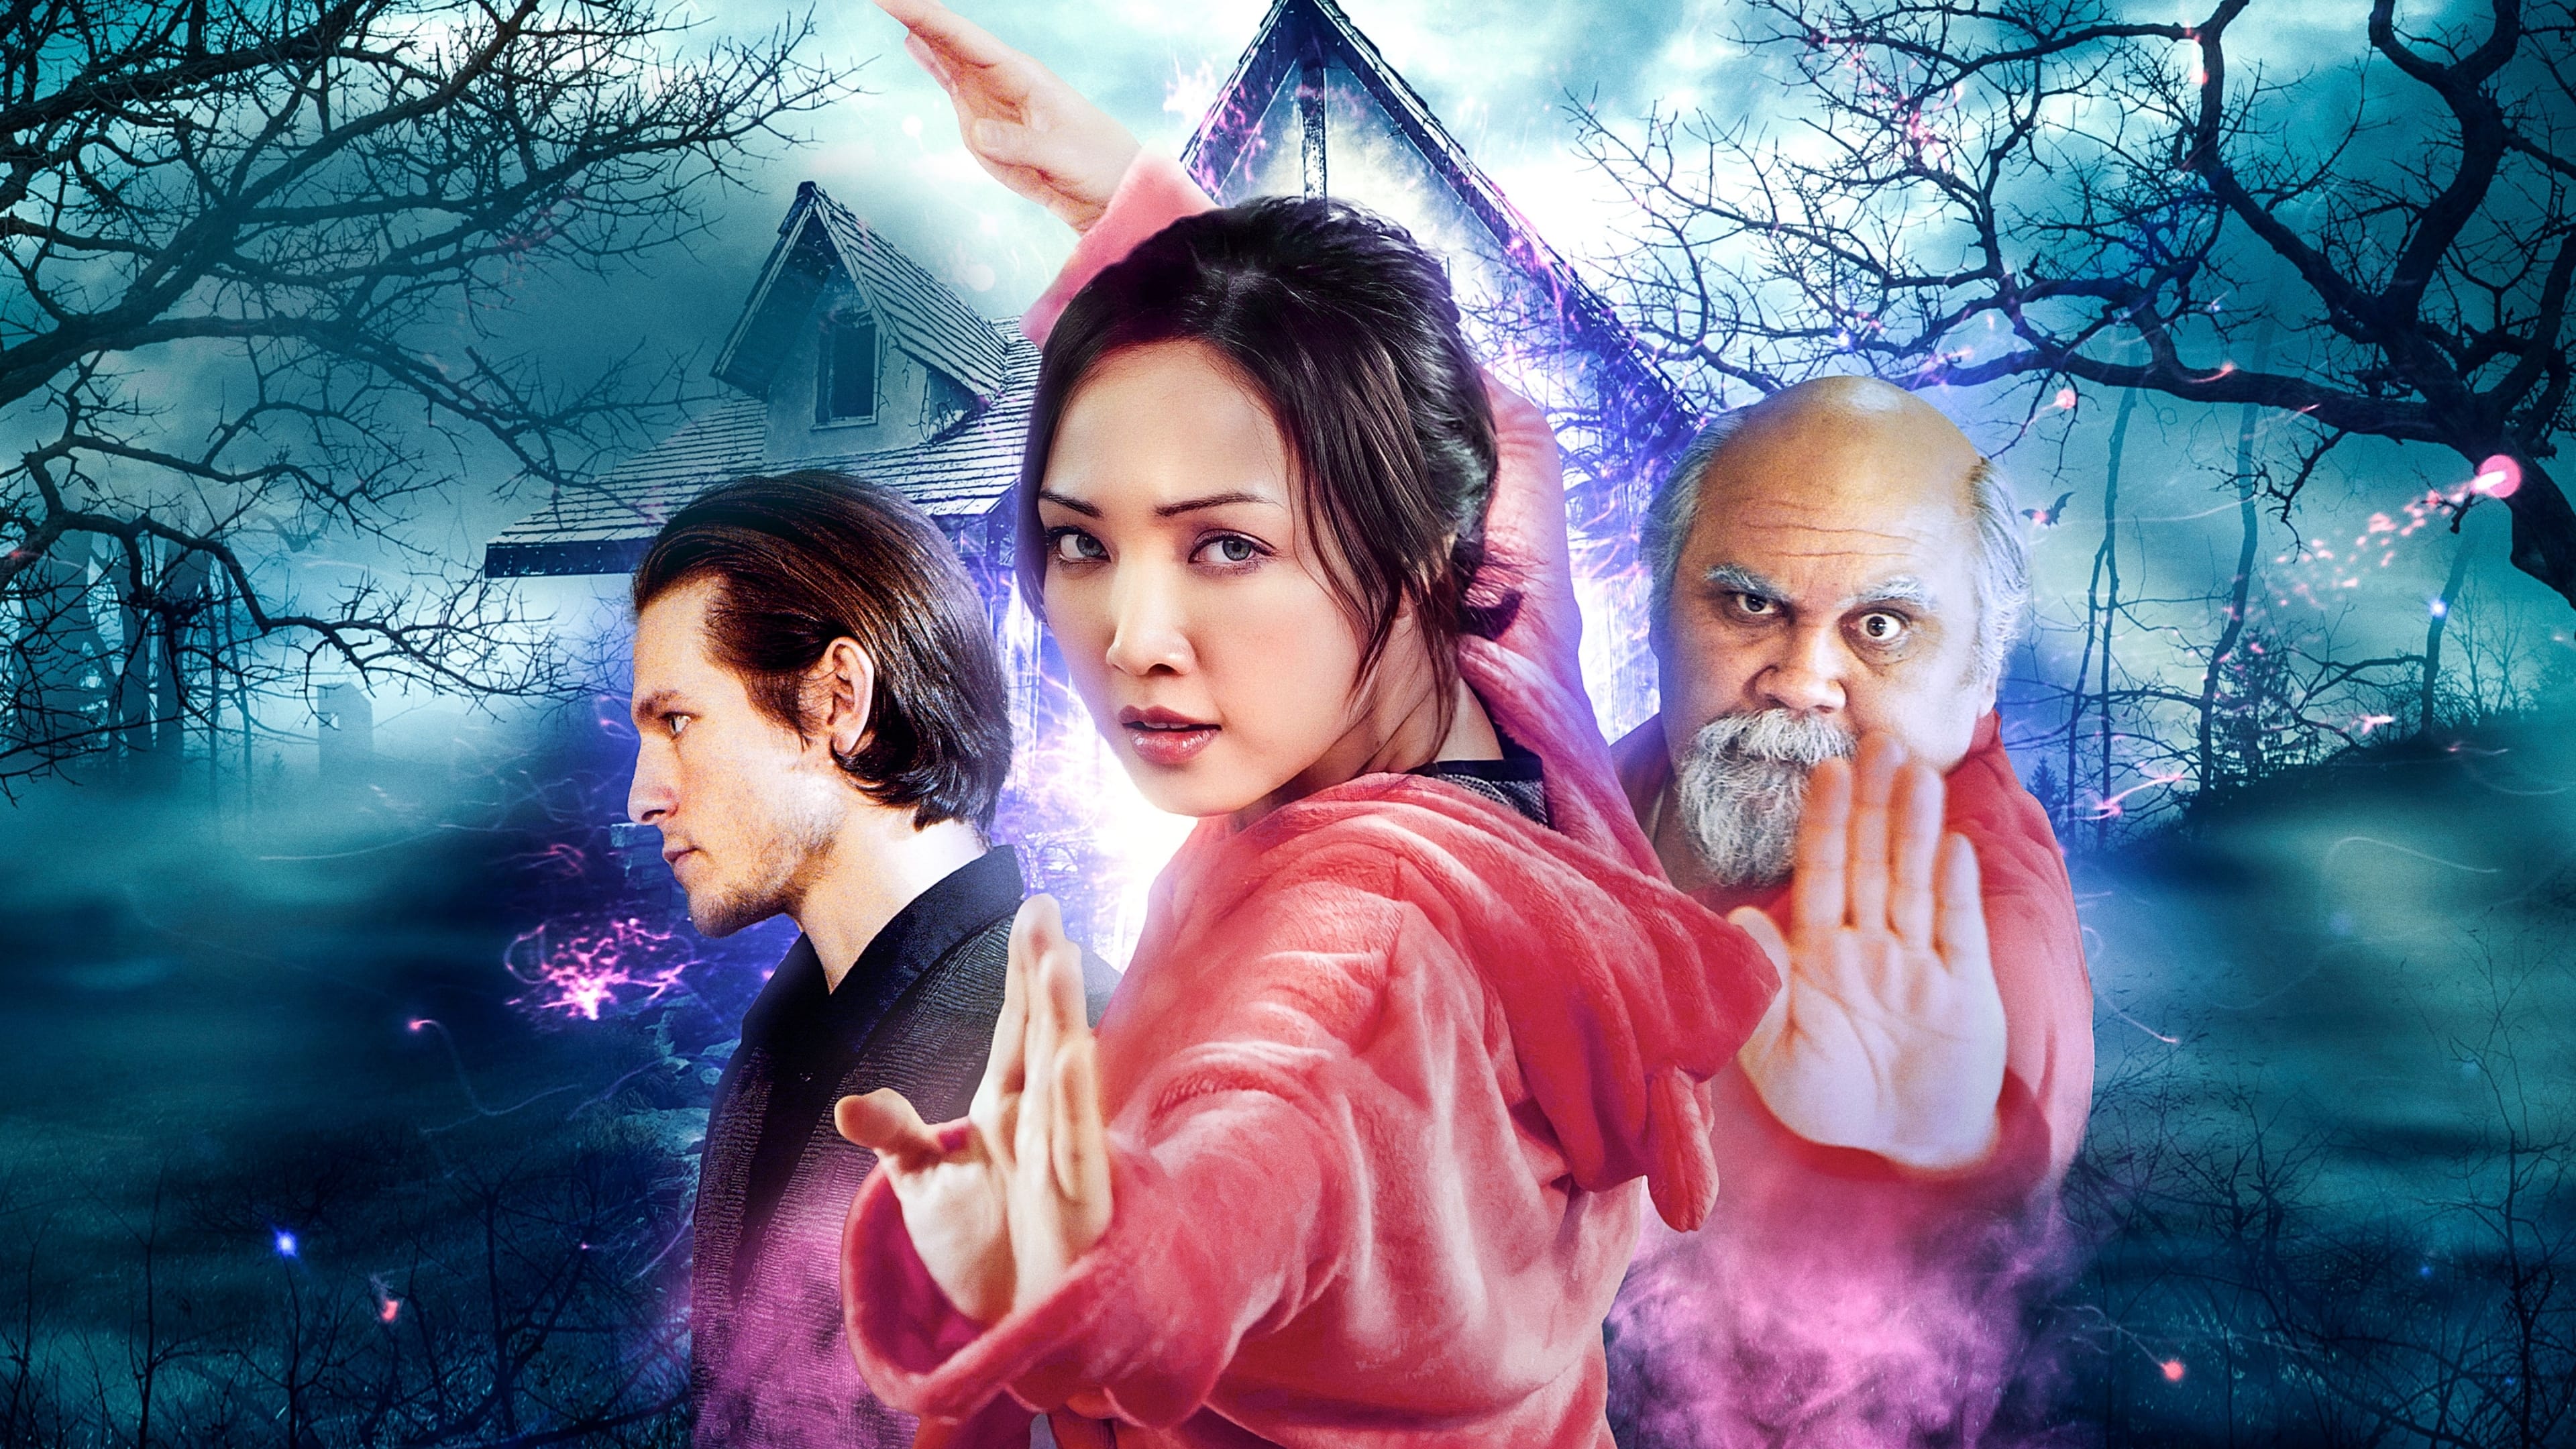 Kung Fu Ghost (2022)